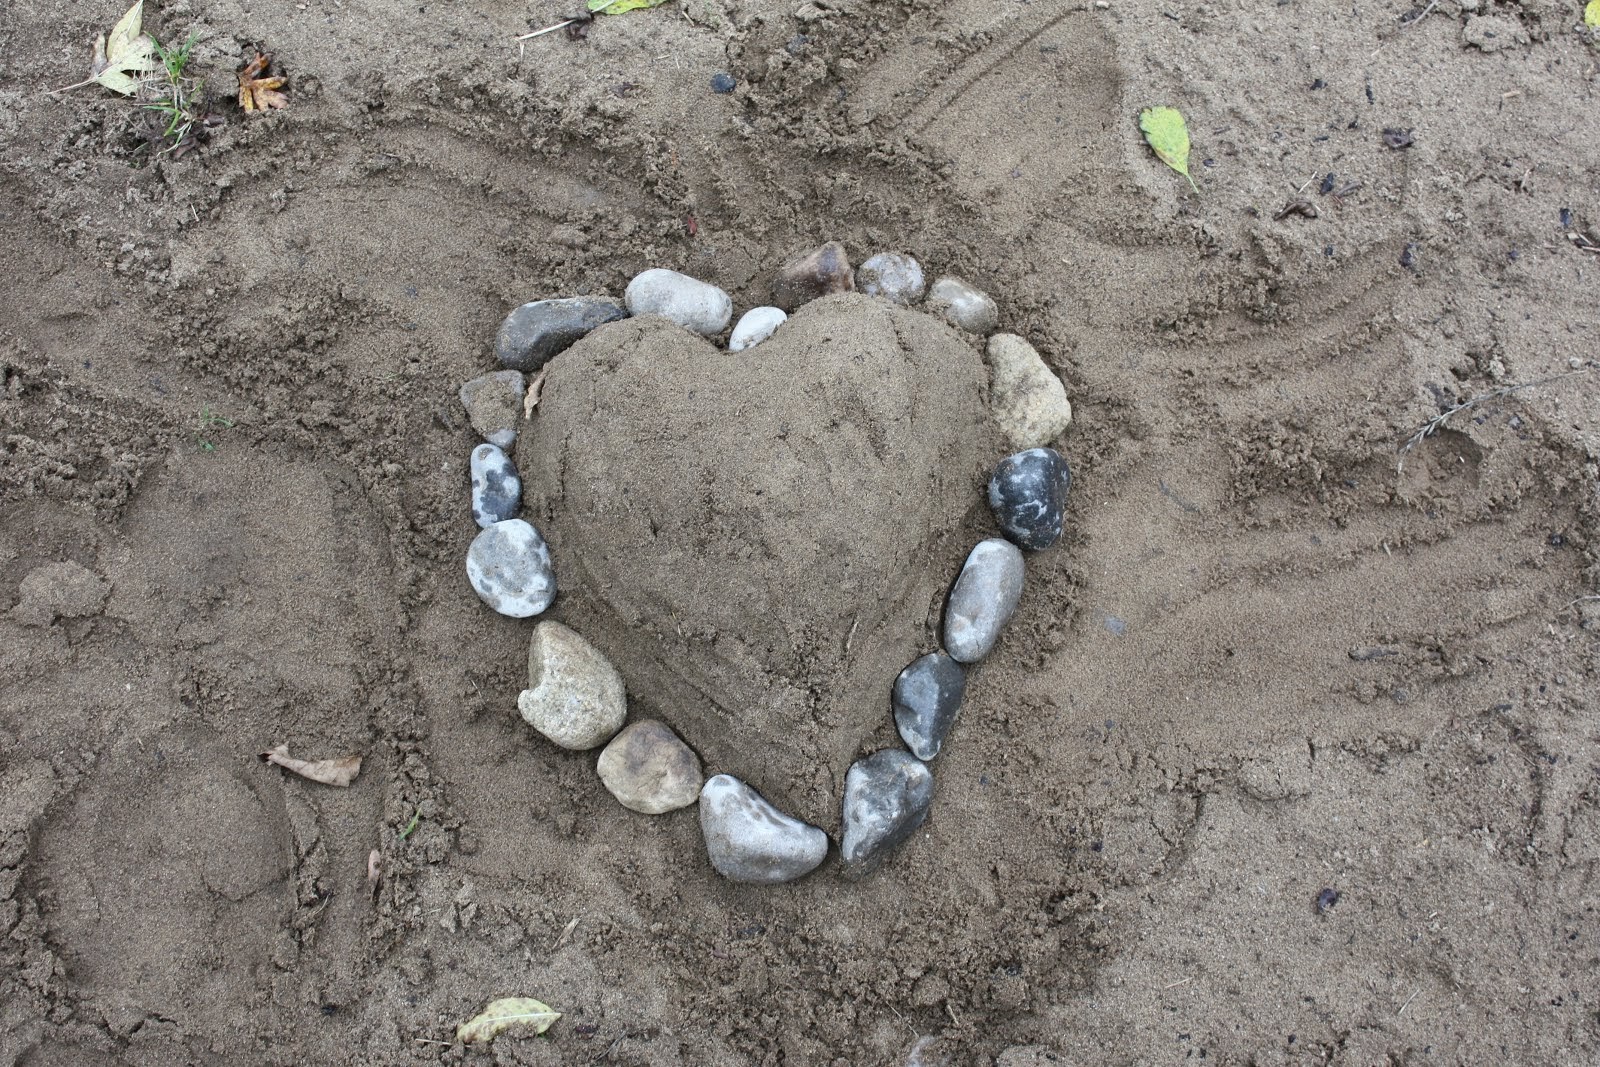 Making hearts in the sand...